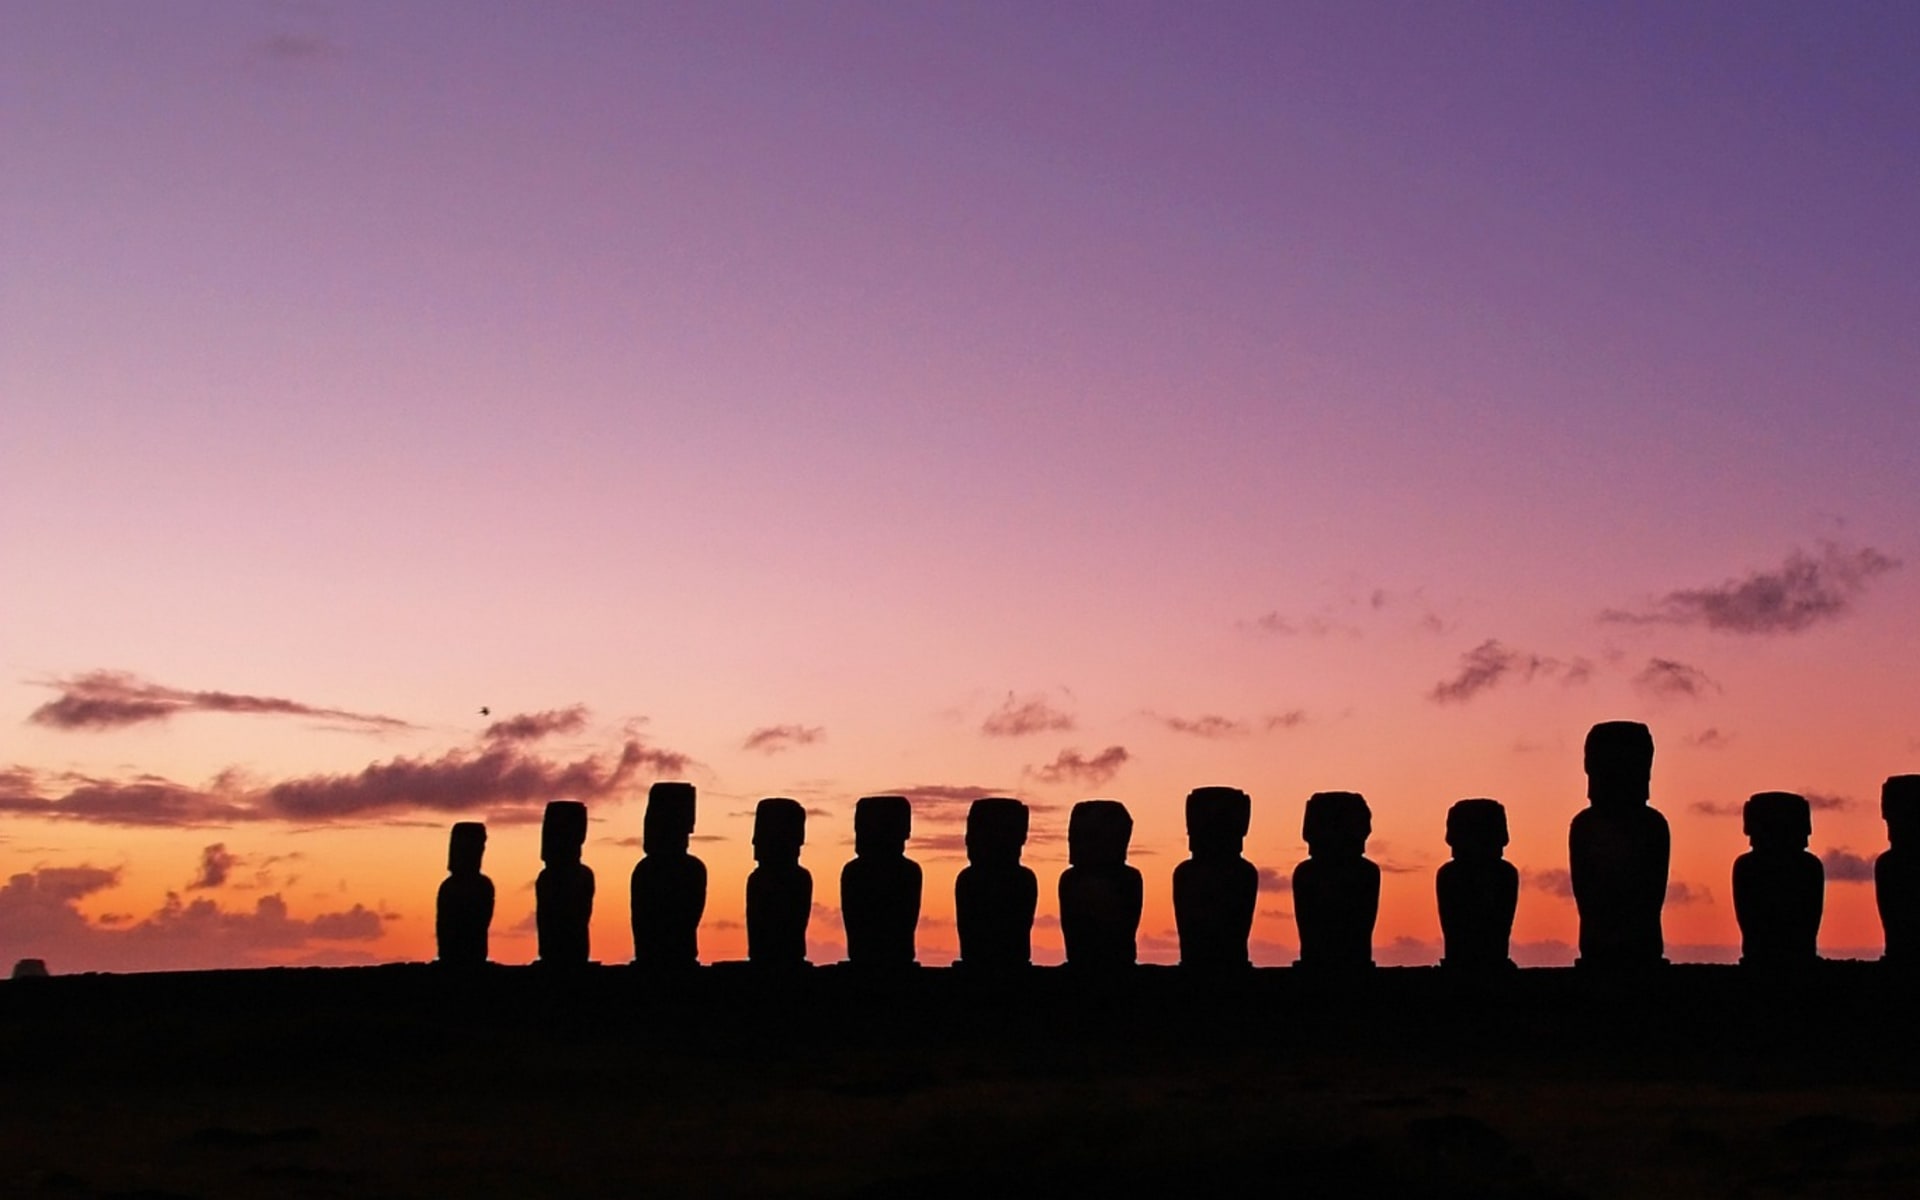 Moai statues in Easter Island stand in a row while the sun sets, cascading orange, yellow and purple hues across the sky.